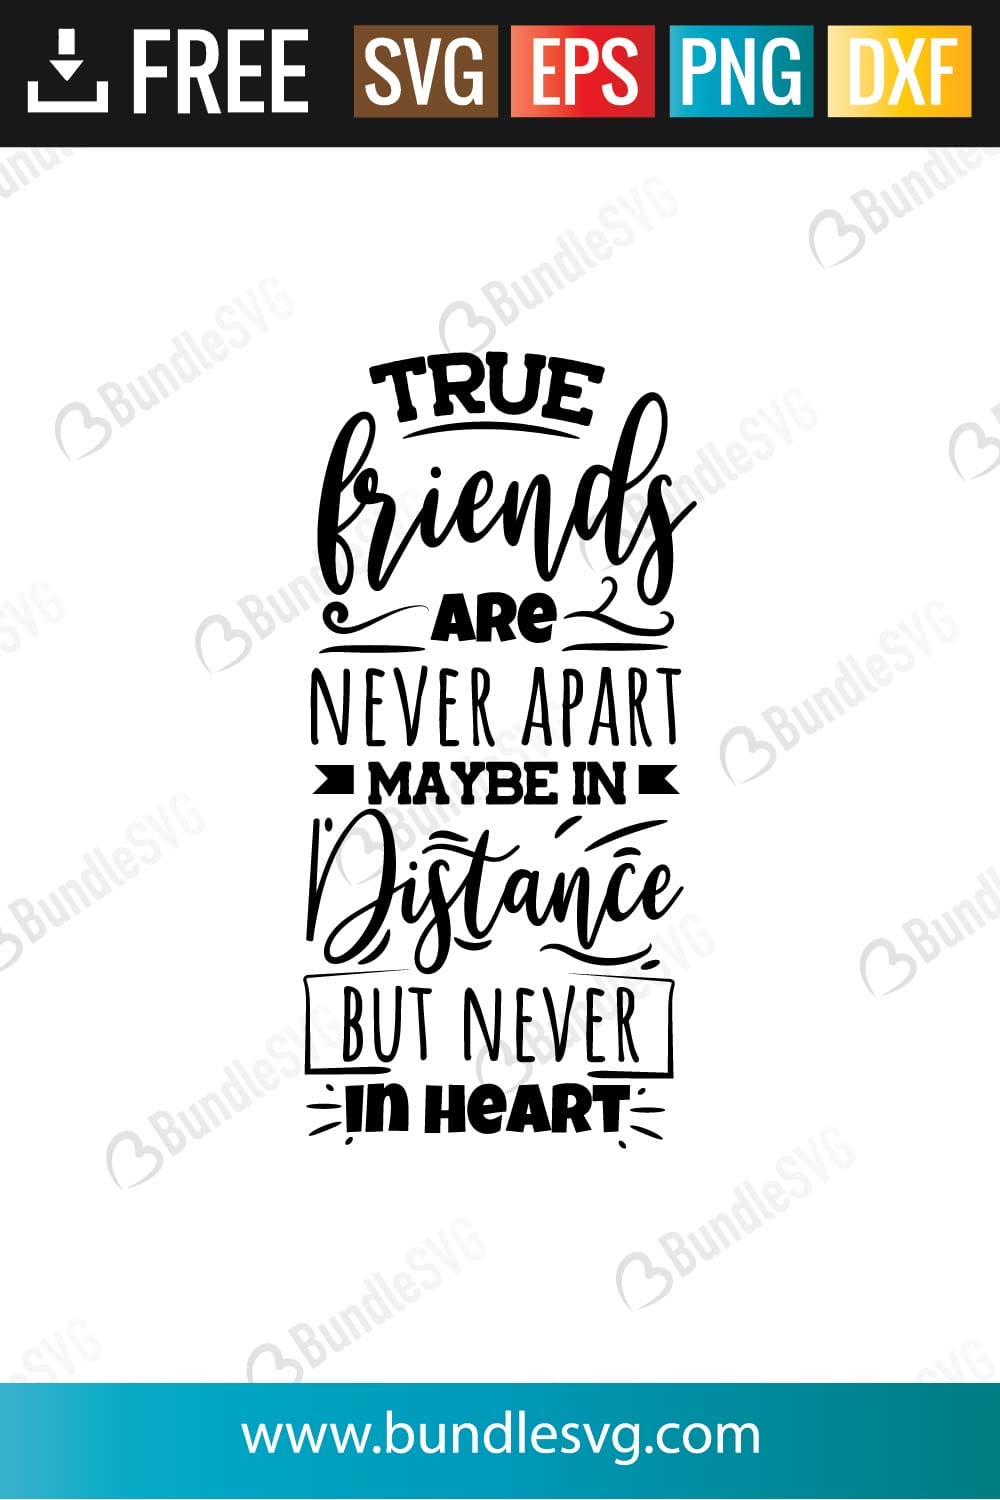 free download images of friendship quotes